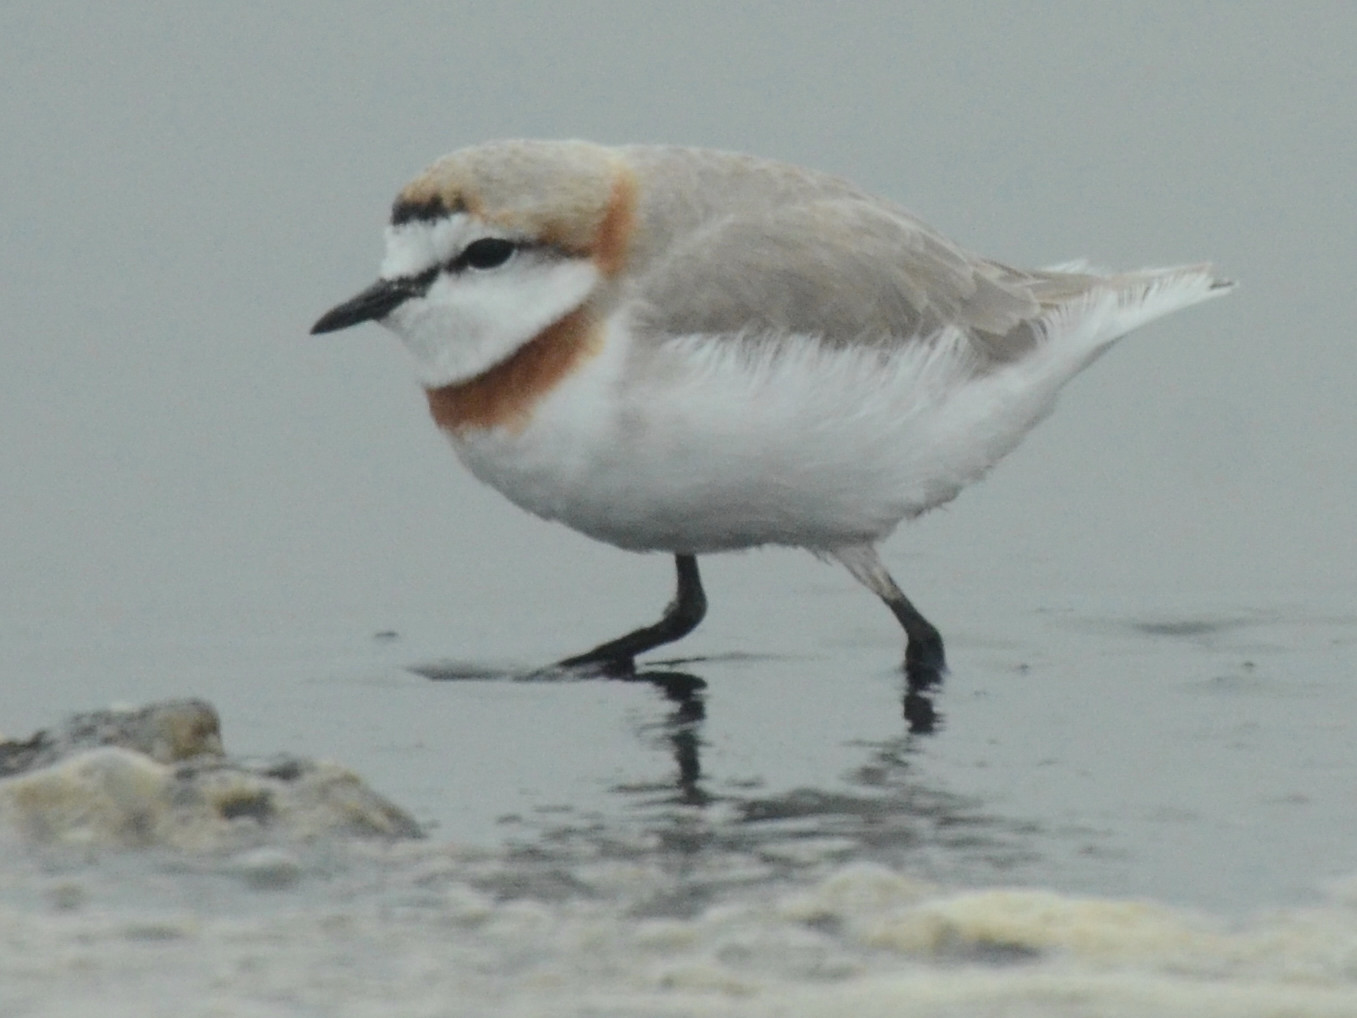 Click picture to see more Chestnut-banded Plovers.